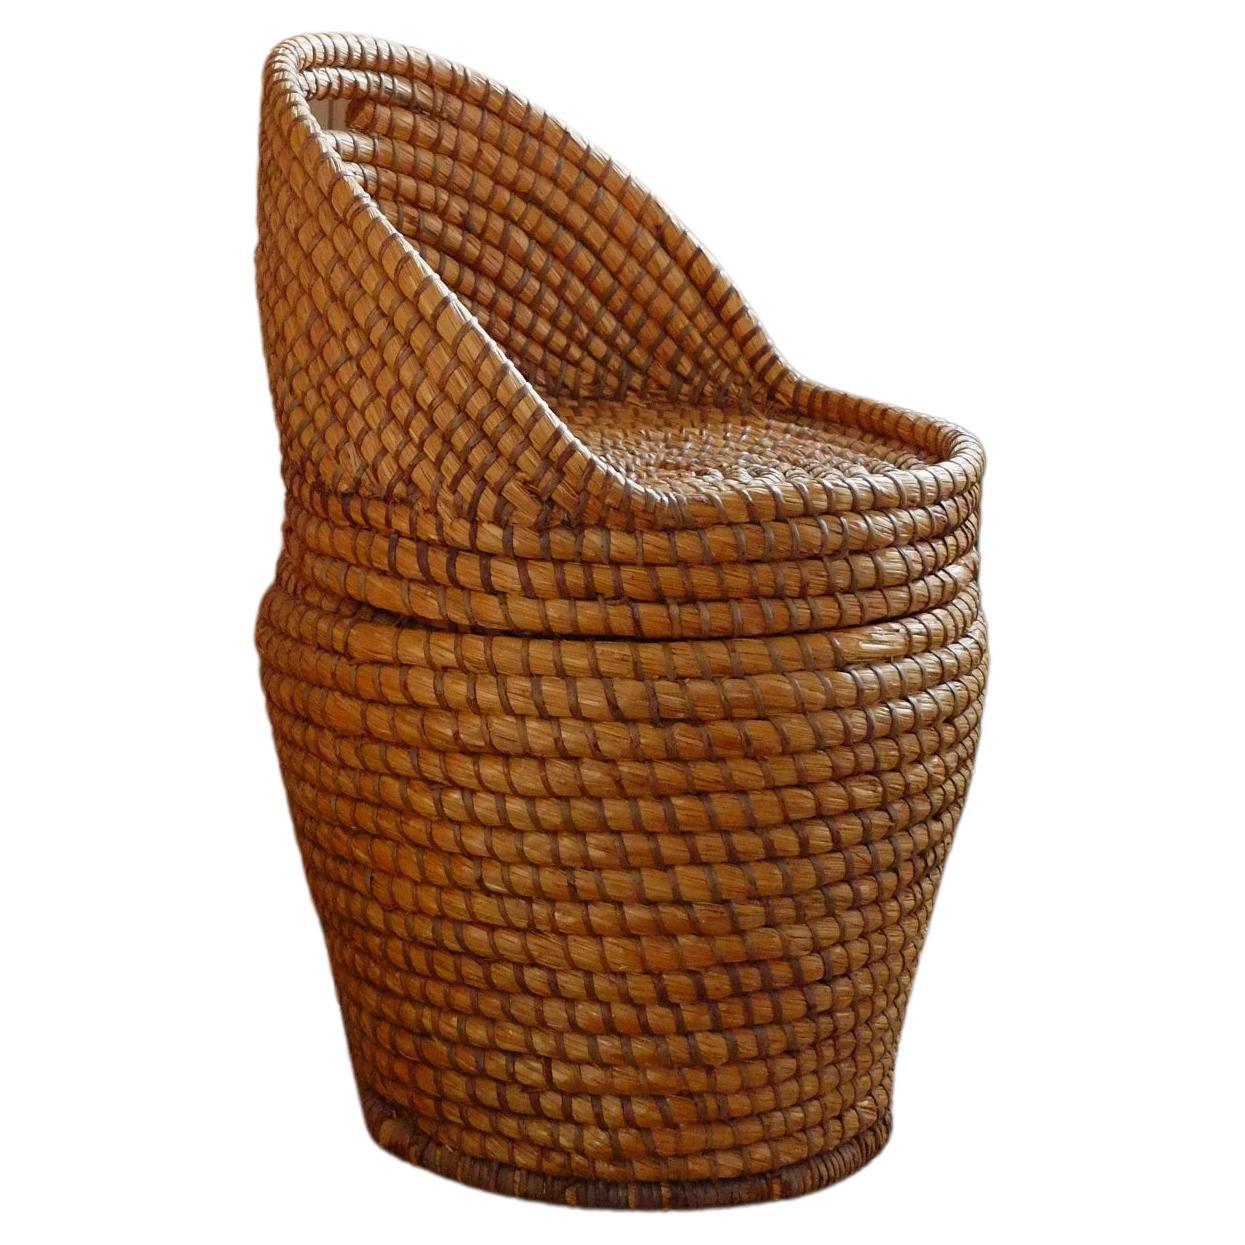 Midcentury Bohemian Reeded Hand Woven Straw Basket Chair / Laundry Basket Seat For Sale